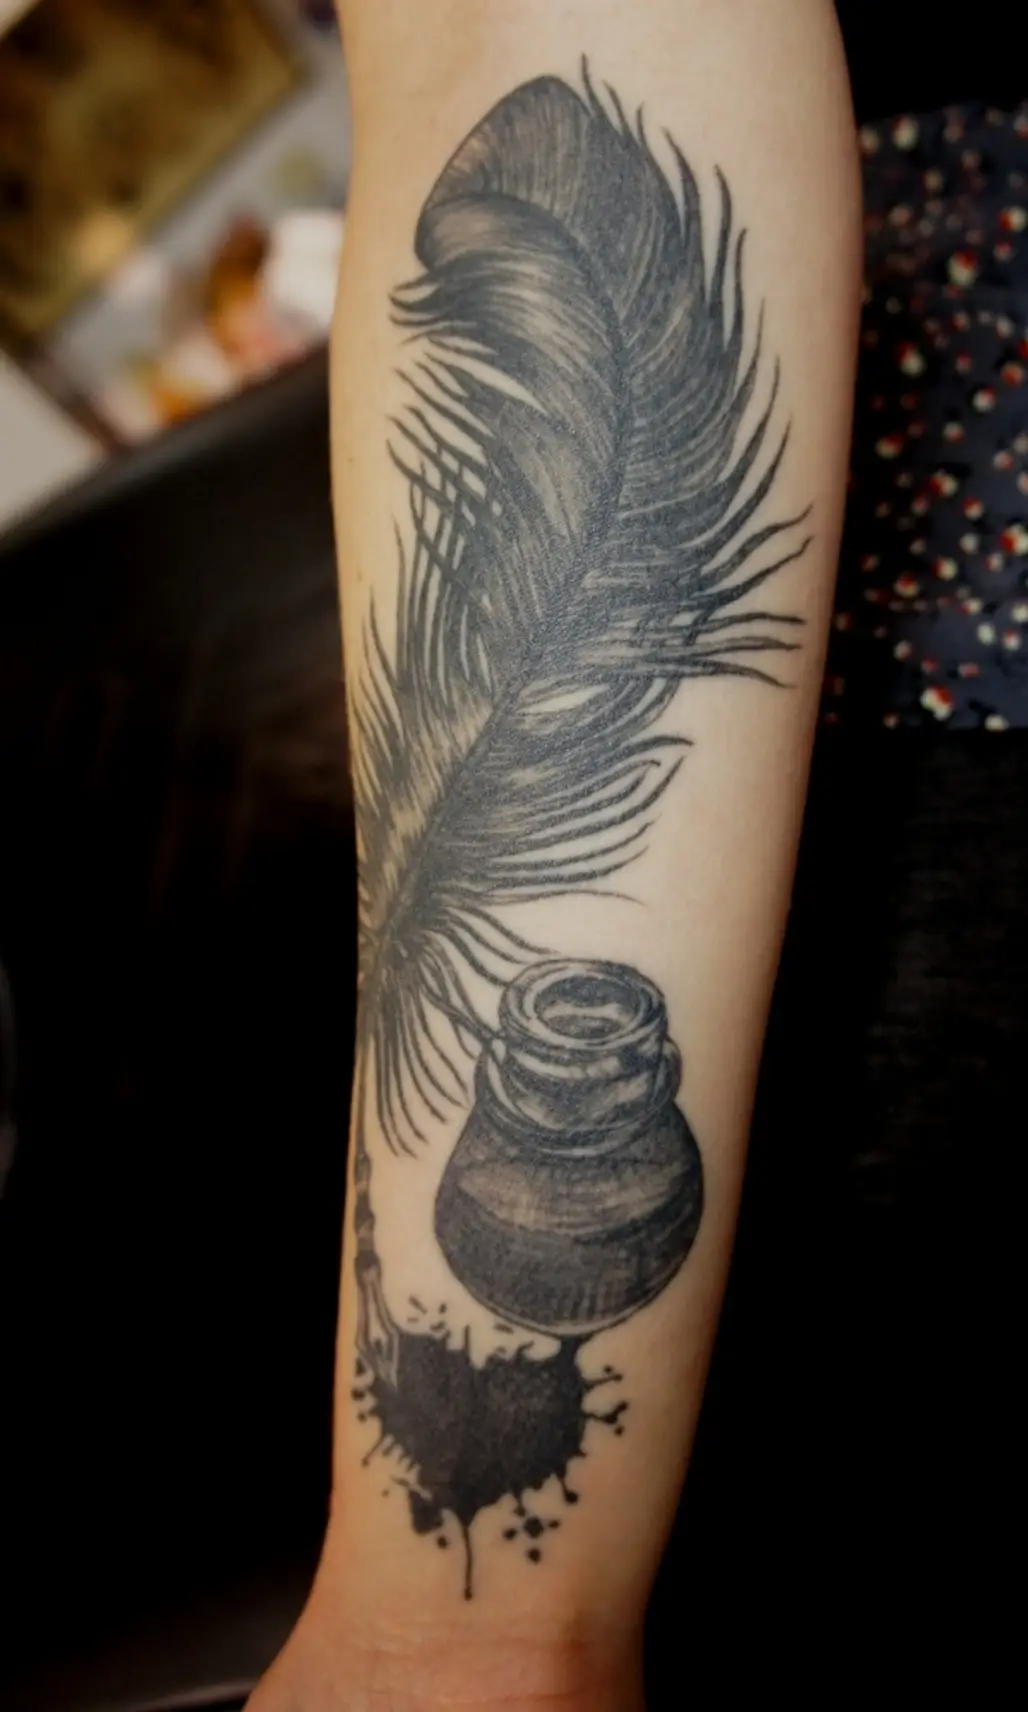 Cutesy Quill and Ink